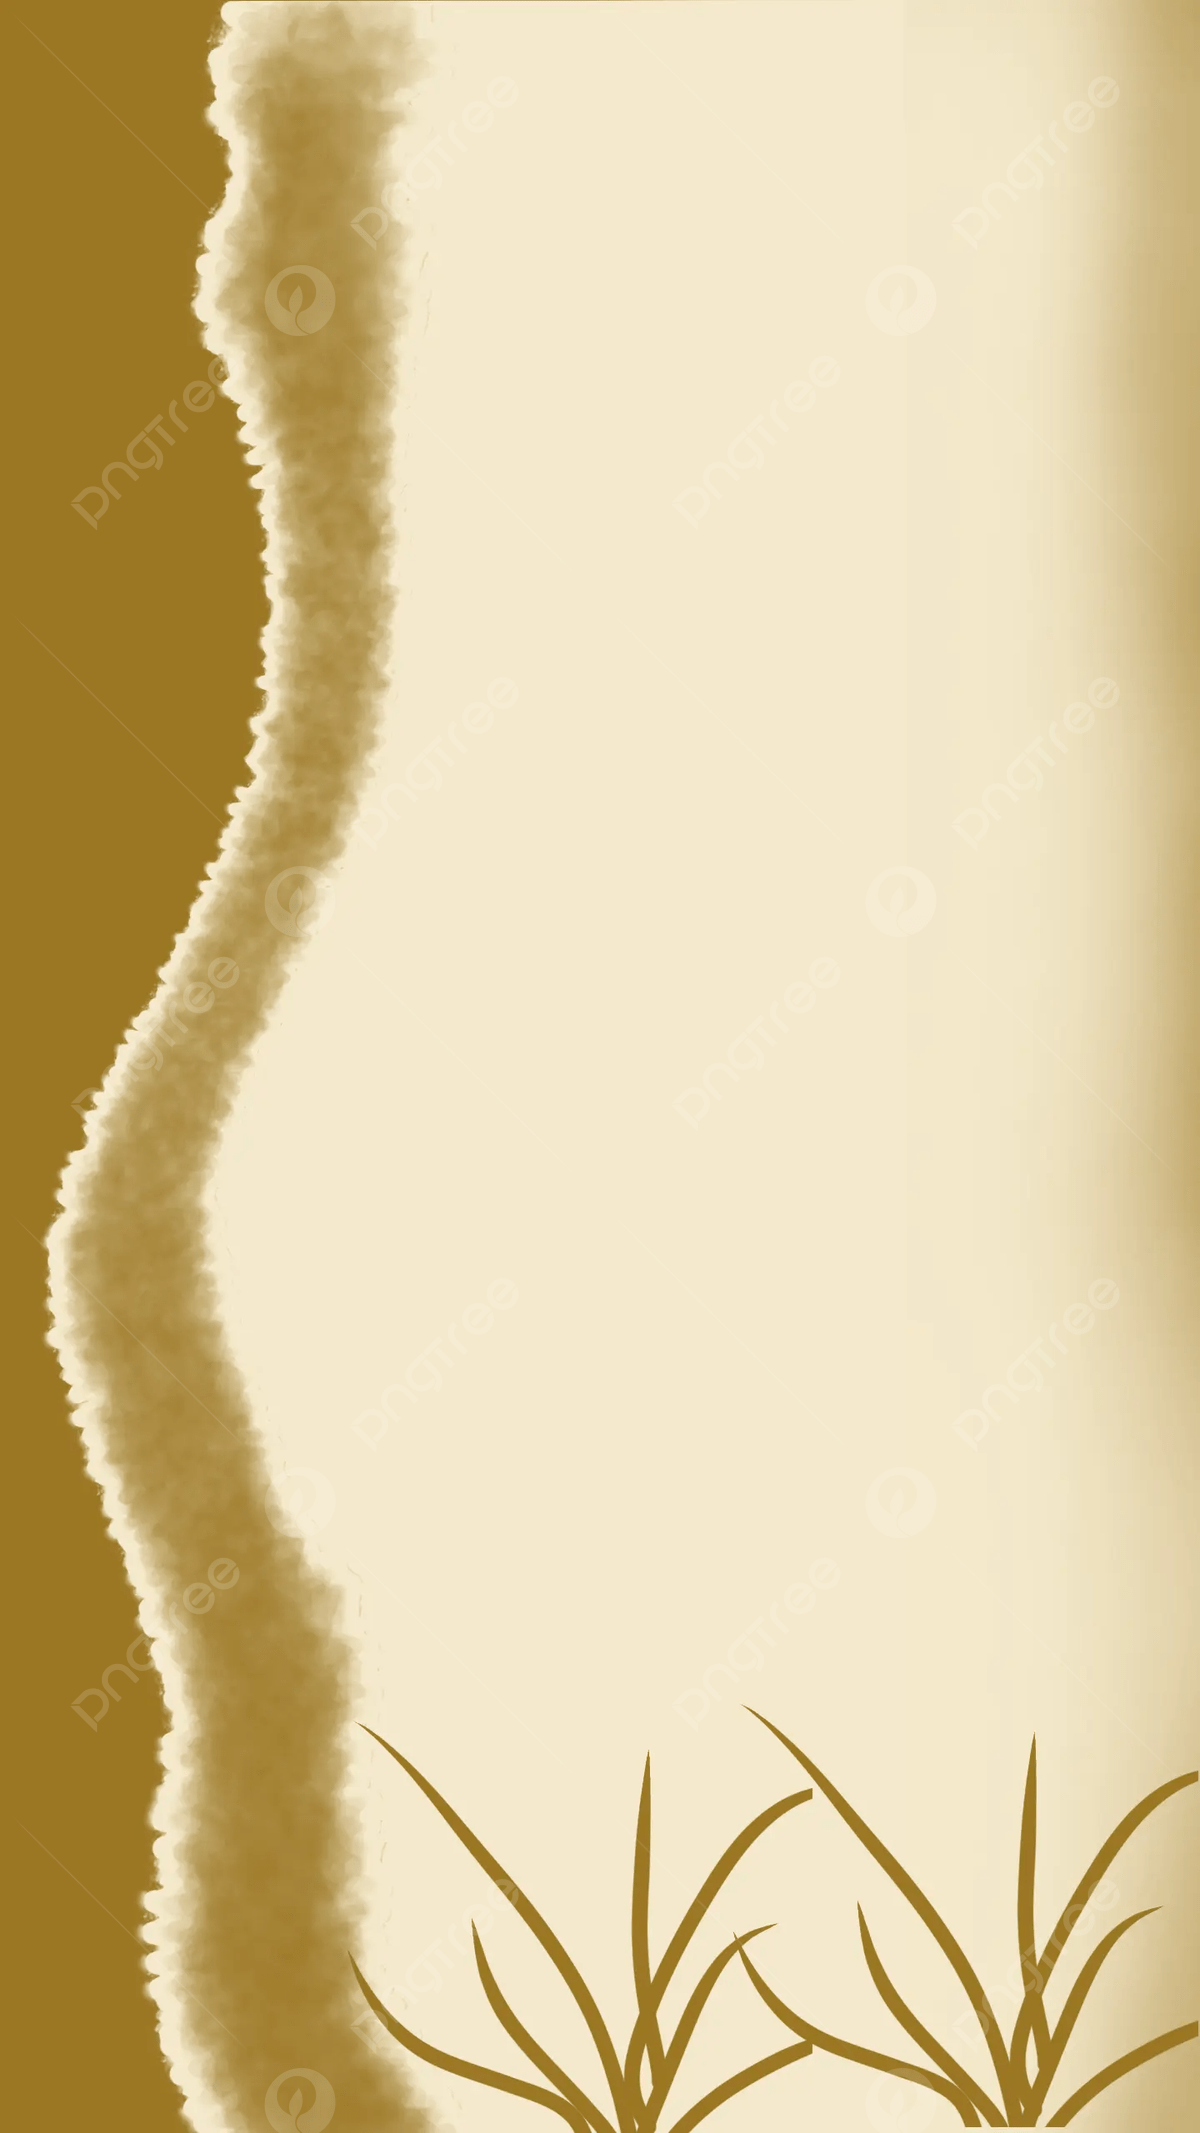 Brown And Cream Aesthetic Background Wallpaper Image For Free Download